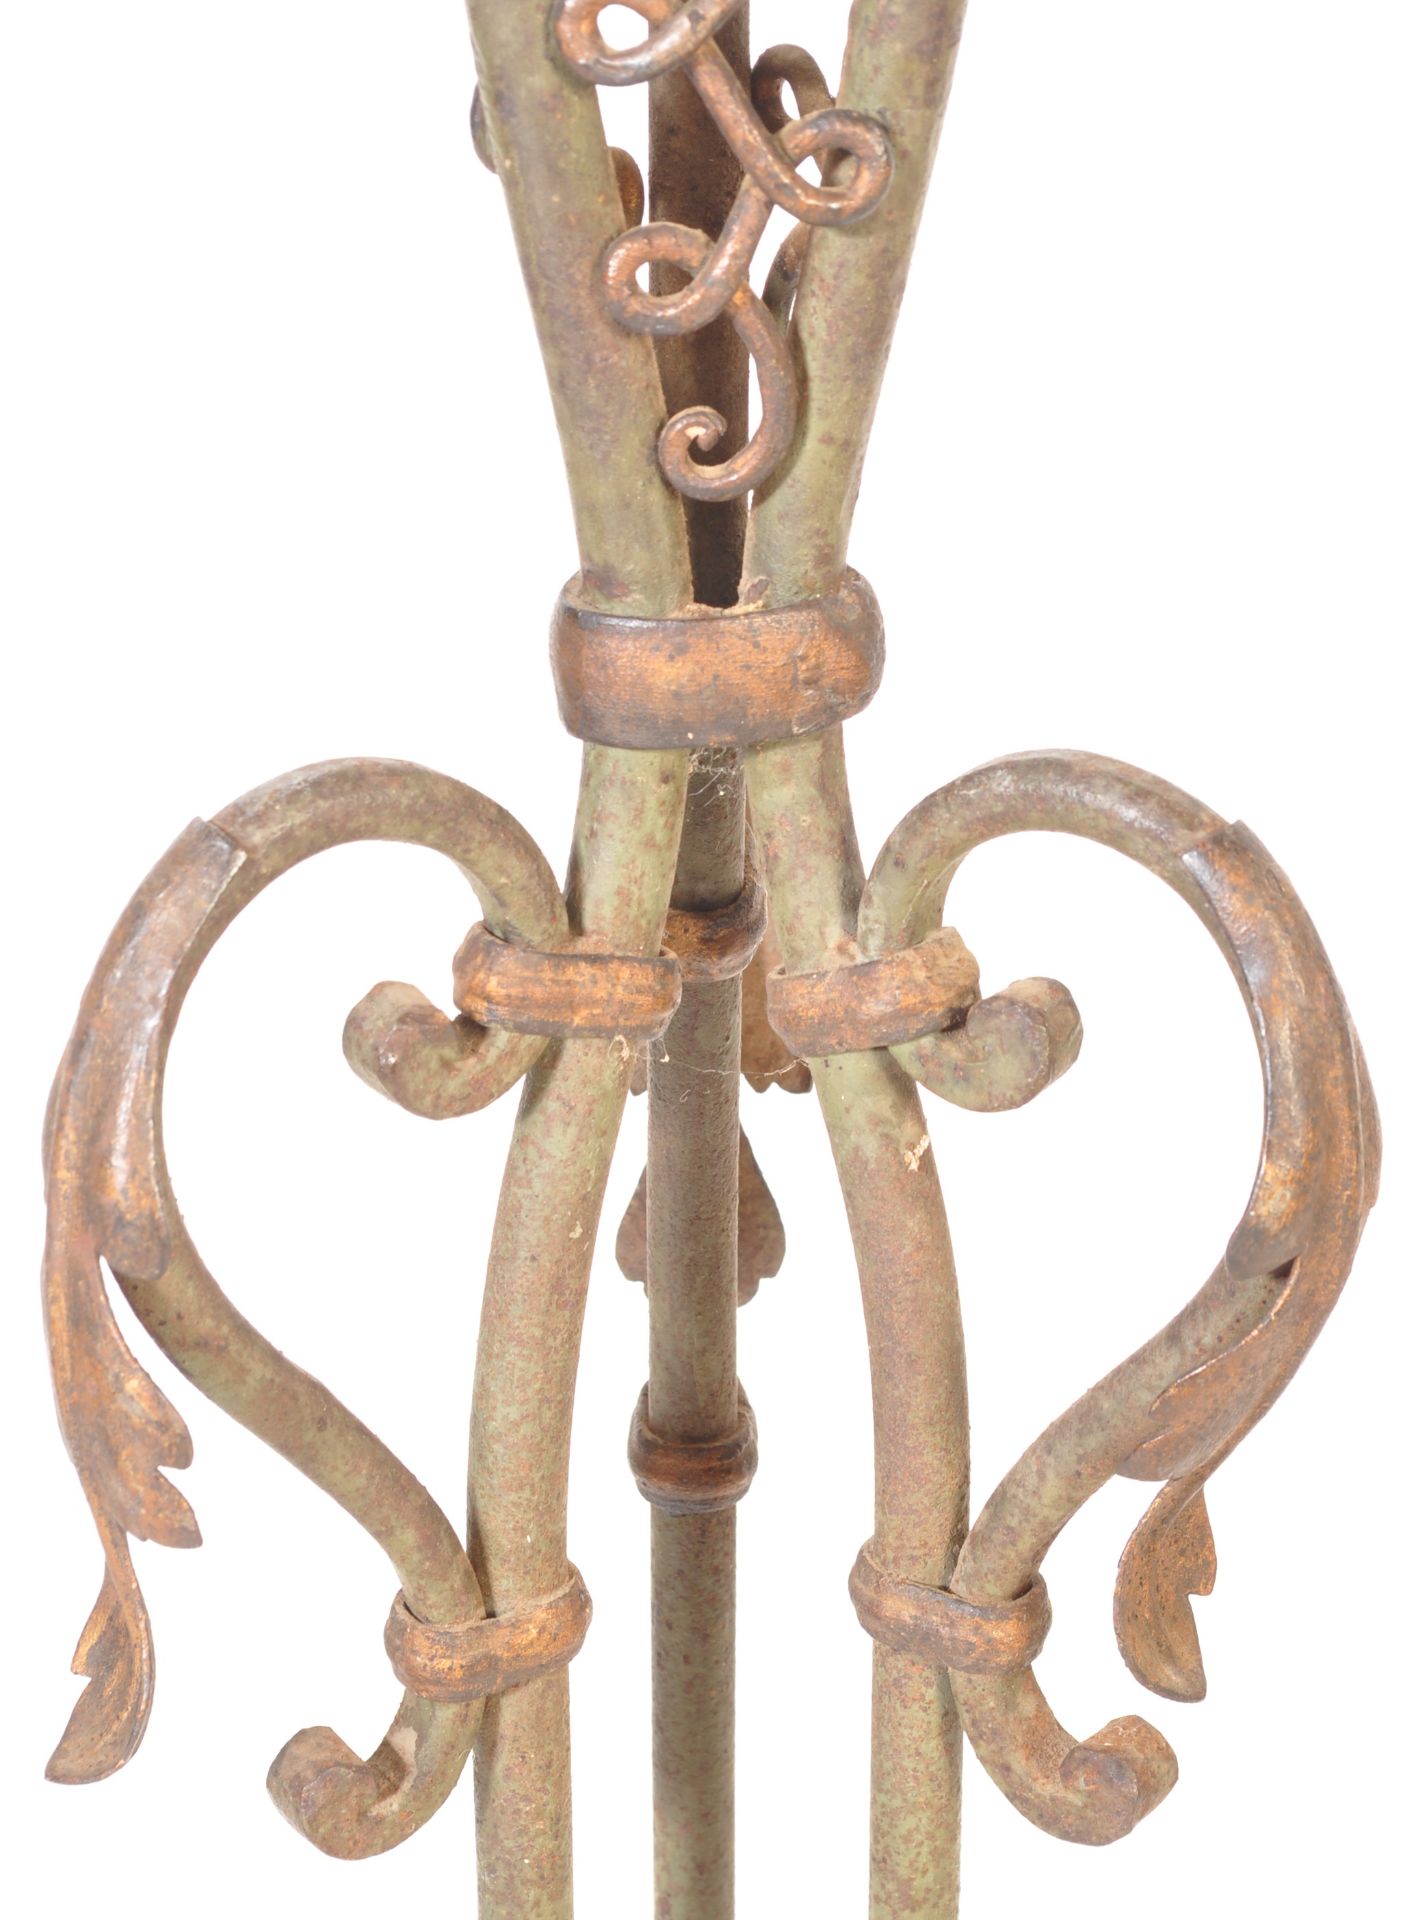 EARLY 20TH CENTURY CAST METAL FLOOR STANDING LAMP - Image 4 of 5